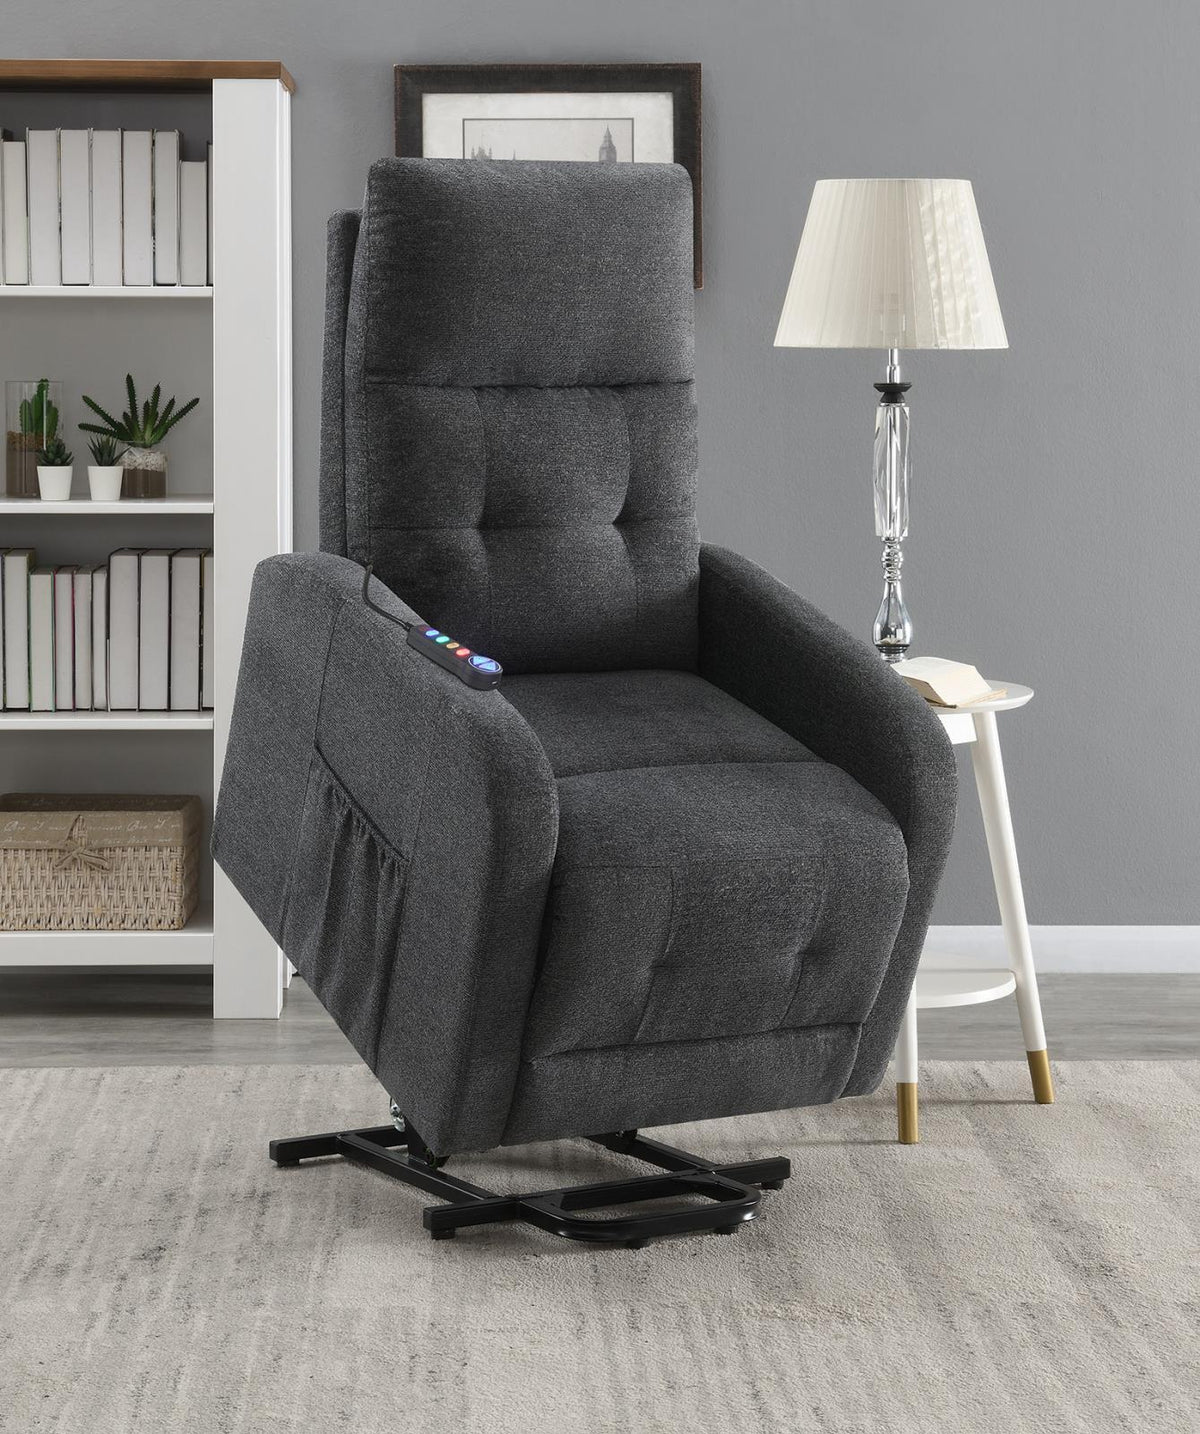 Howie Tufted Upholstered Power Lift Recliner Charcoal Howie Tufted Upholstered Power Lift Recliner Charcoal Half Price Furniture